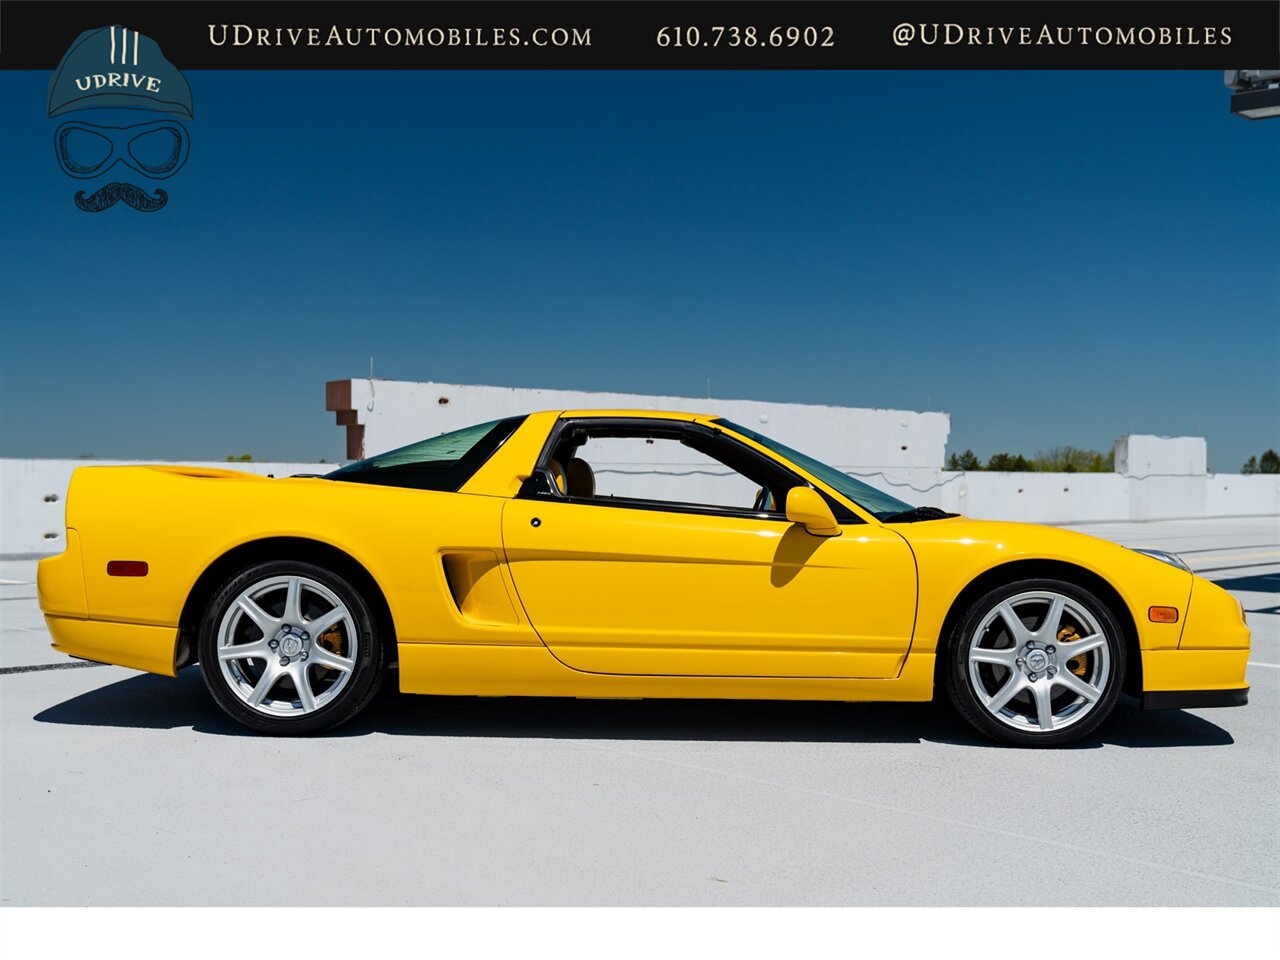 2003 Acura NSX NSX-T  Spa Yellow over Yellow Lthr 1 of 13 Produced - Photo 17 - West Chester, PA 19382